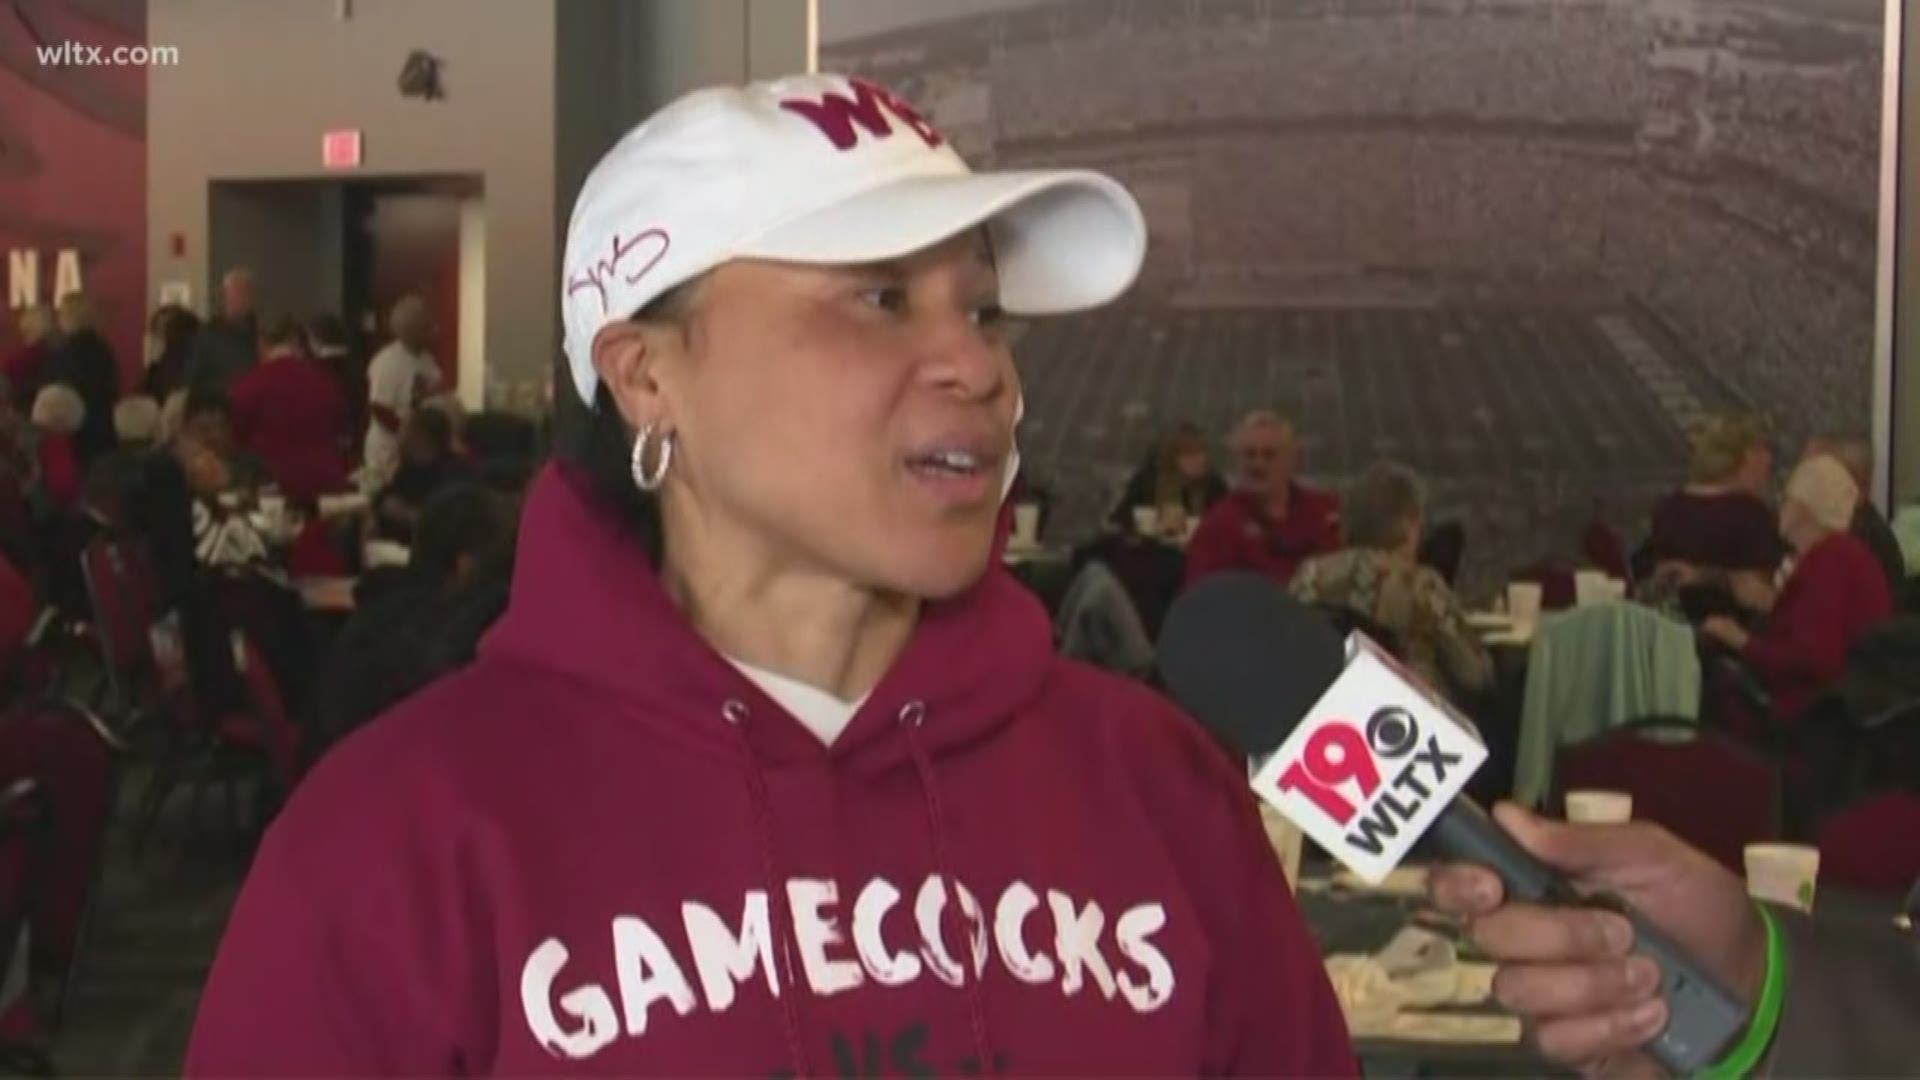 South Carolina Gamecocks Coach Dawn Staley says her team is ready to begin their run in the NCAA tournament.